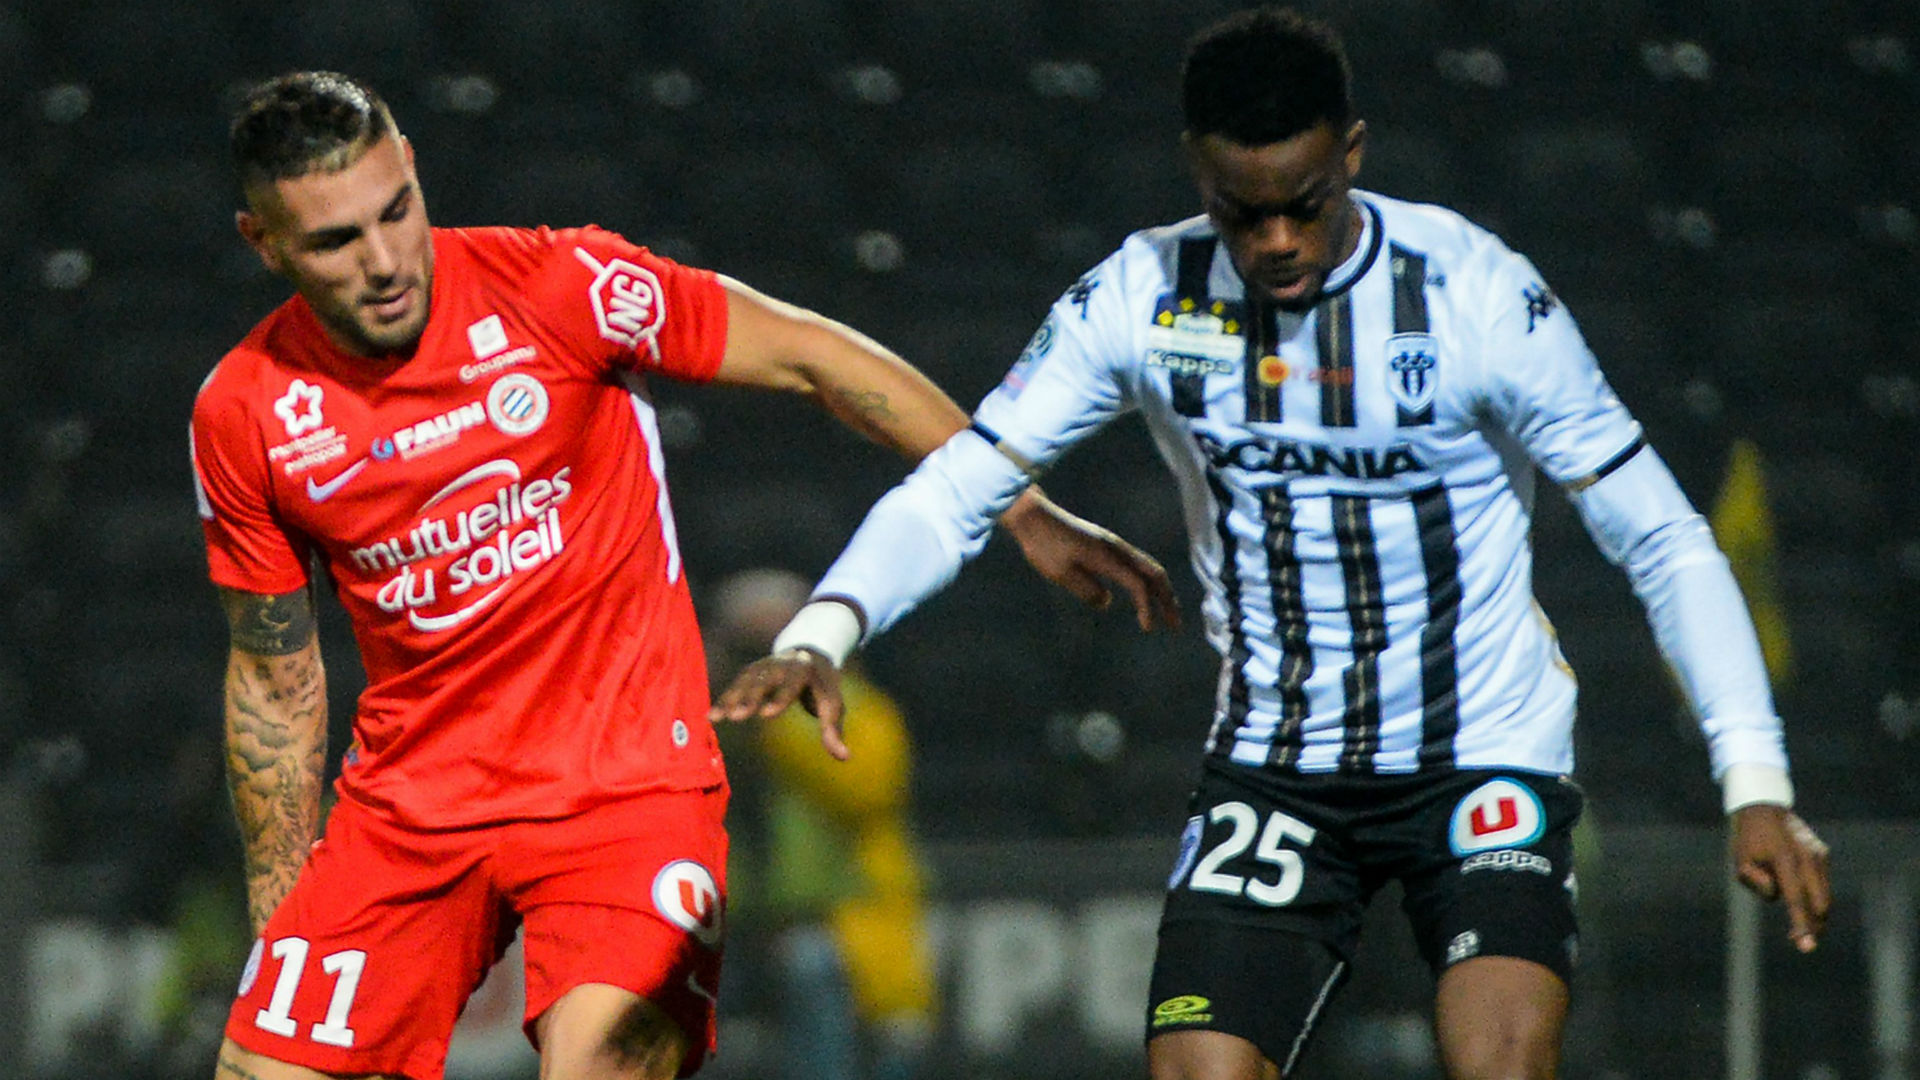 OFFICIEL - Abdoulaye Bamba rempile à Angers